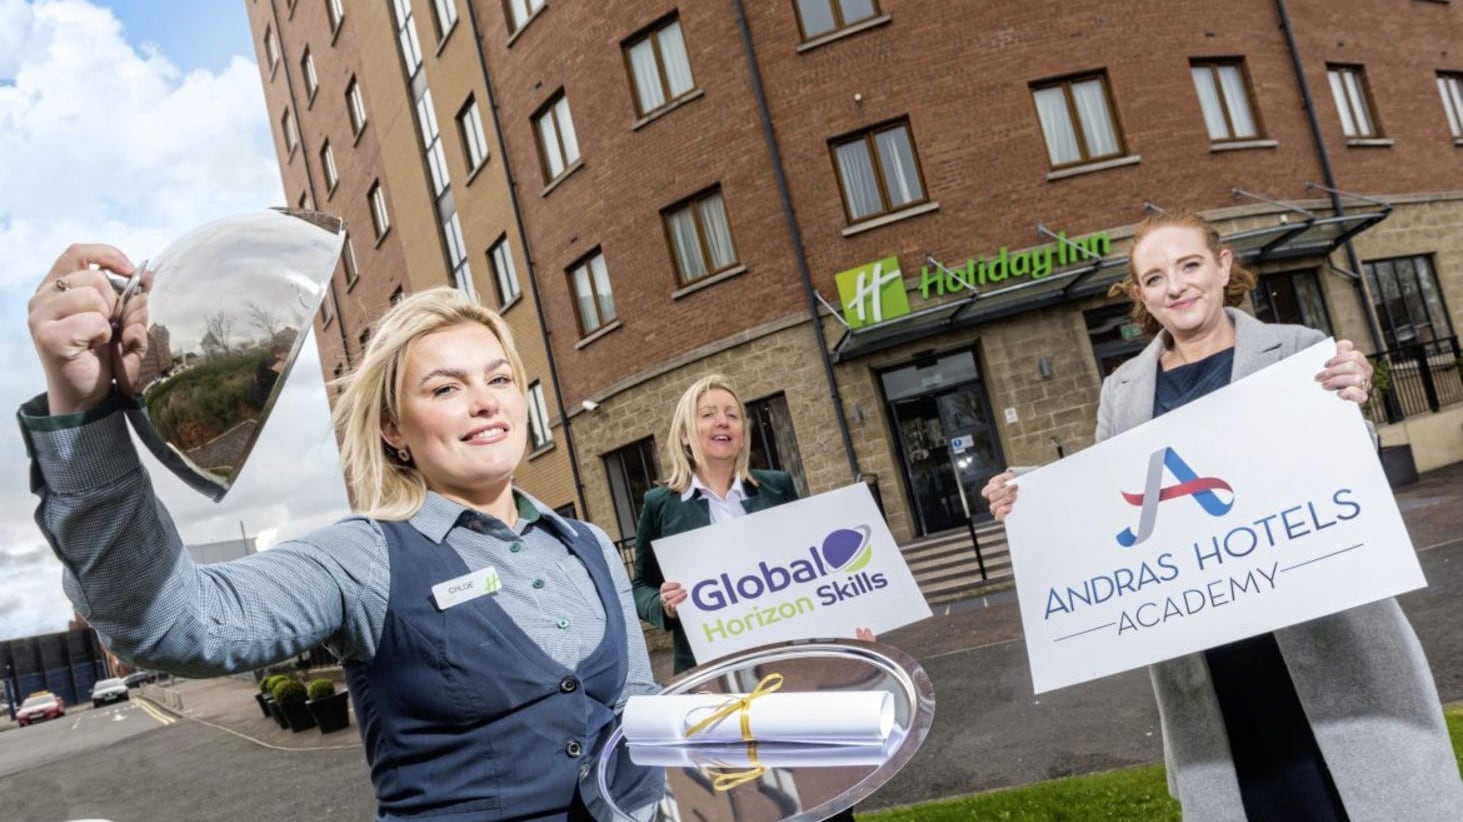 Chloe O&rsquo;Toole, receptionist at Holiday Inn Belfast, pictured with Catherine McGeady, business development manager at Global Horizon Skills and Jacqueline Canning, HR manager in Andras Hotels 